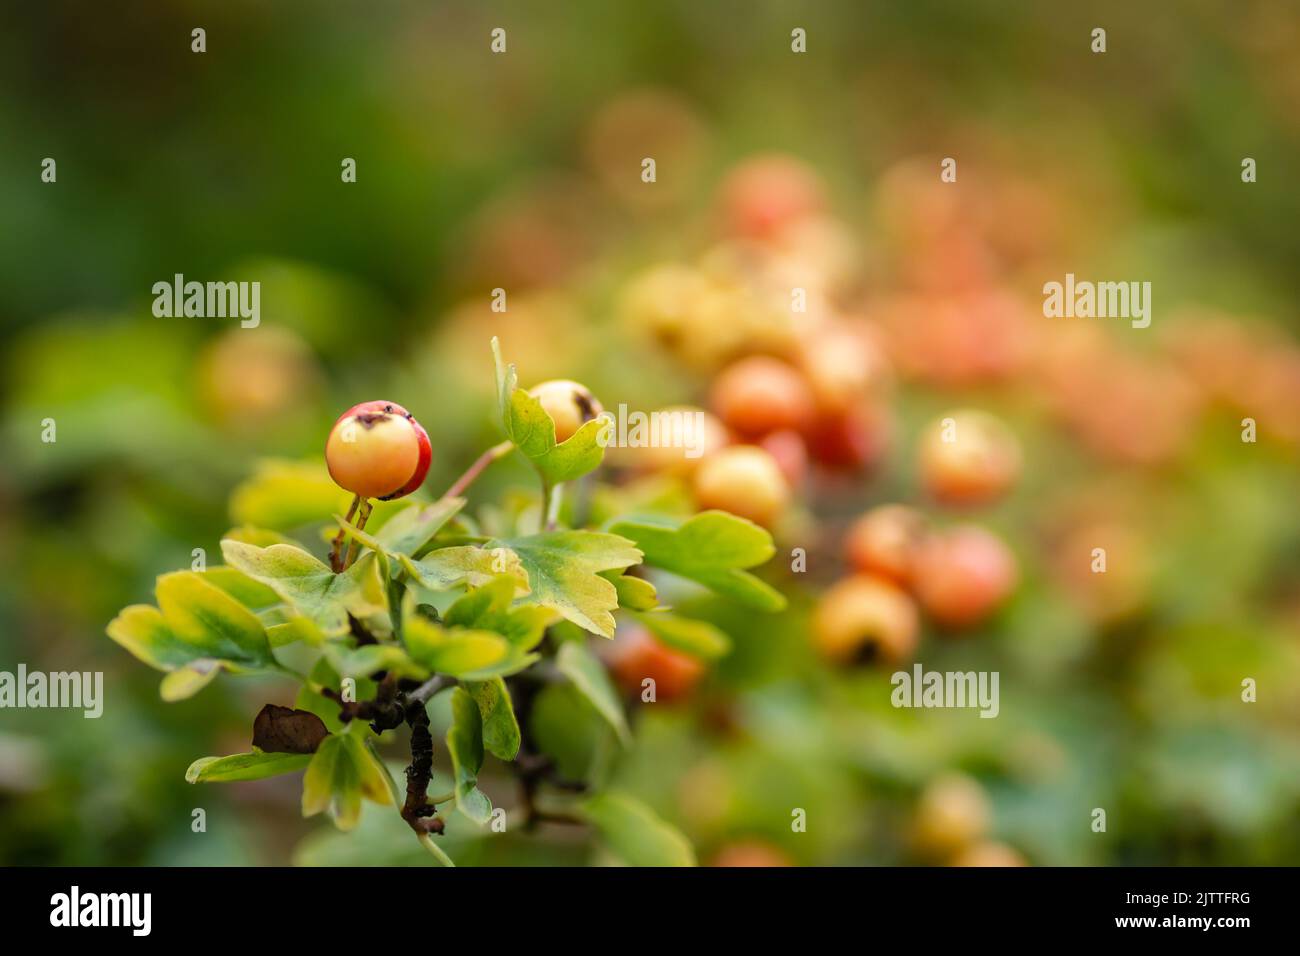 Unripe fruits on a Crataegus tree in summer. Crataegus hawthorn, quickthorn, thornapple, May tree, whitethorn, hawberry red ripe berries on branch wit Stock Photo